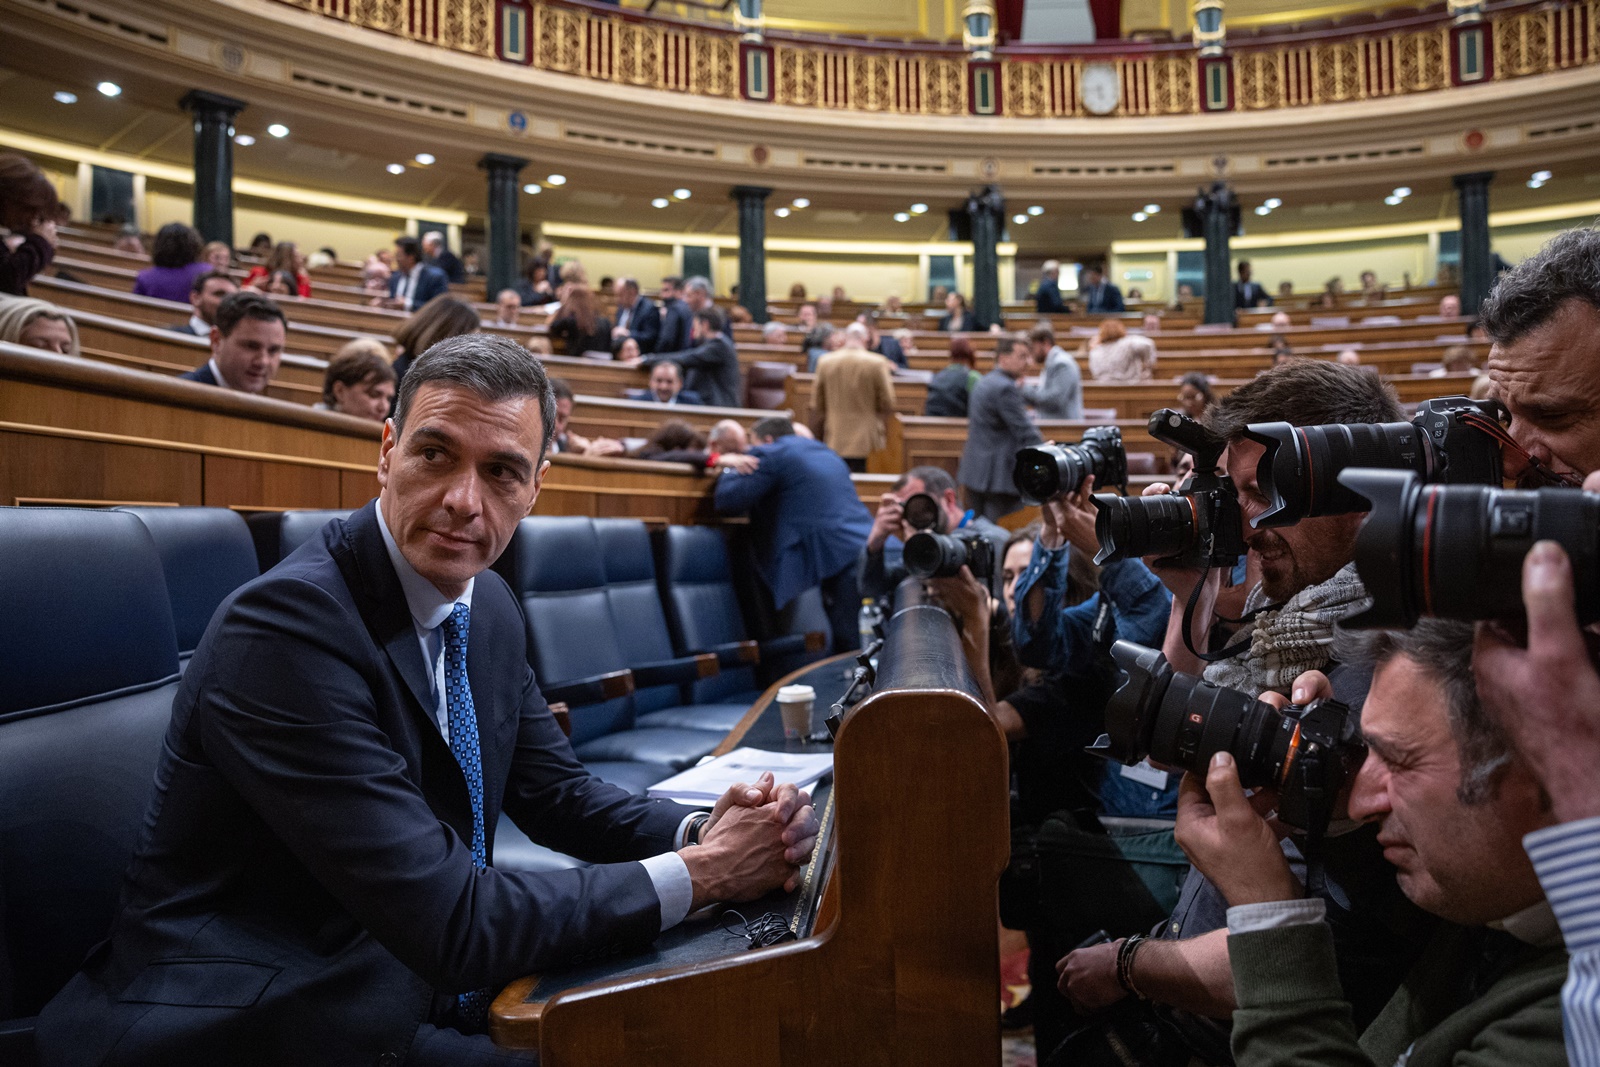 epa11114336 Spanish Prime Minister Pedro Sanchez (L) attends a plenary session at the Spanish Lower House to vote on the so-called Amnesty Law, in Madrid, Spain, 30 January 2024. The amnesty law is part of a deal struck by the Spanish prime minister's Spanish Socialist Workers' Party (PSOE) to form a new minority coalition government with the support of Catalan and Basque pro-independent parties following an inconclusive election in July 2023. The bill would grant amnesty to people facing legal issues for involvement in Catalonia's failed 2017 independence bid.  EPA/DANIEL GONZALEZ